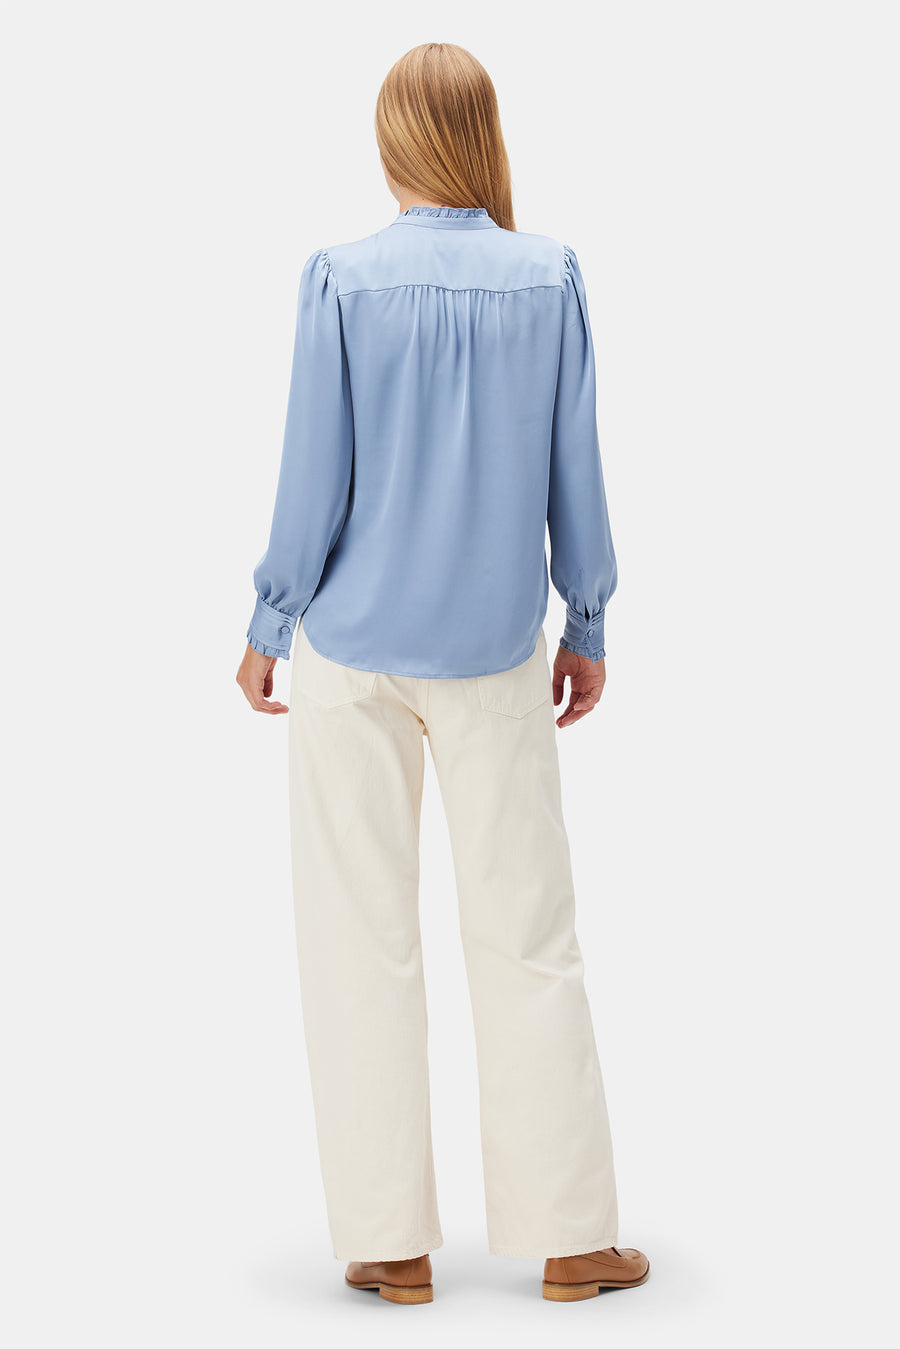 Charlotte Recycled Polyester Blouse - Horizon